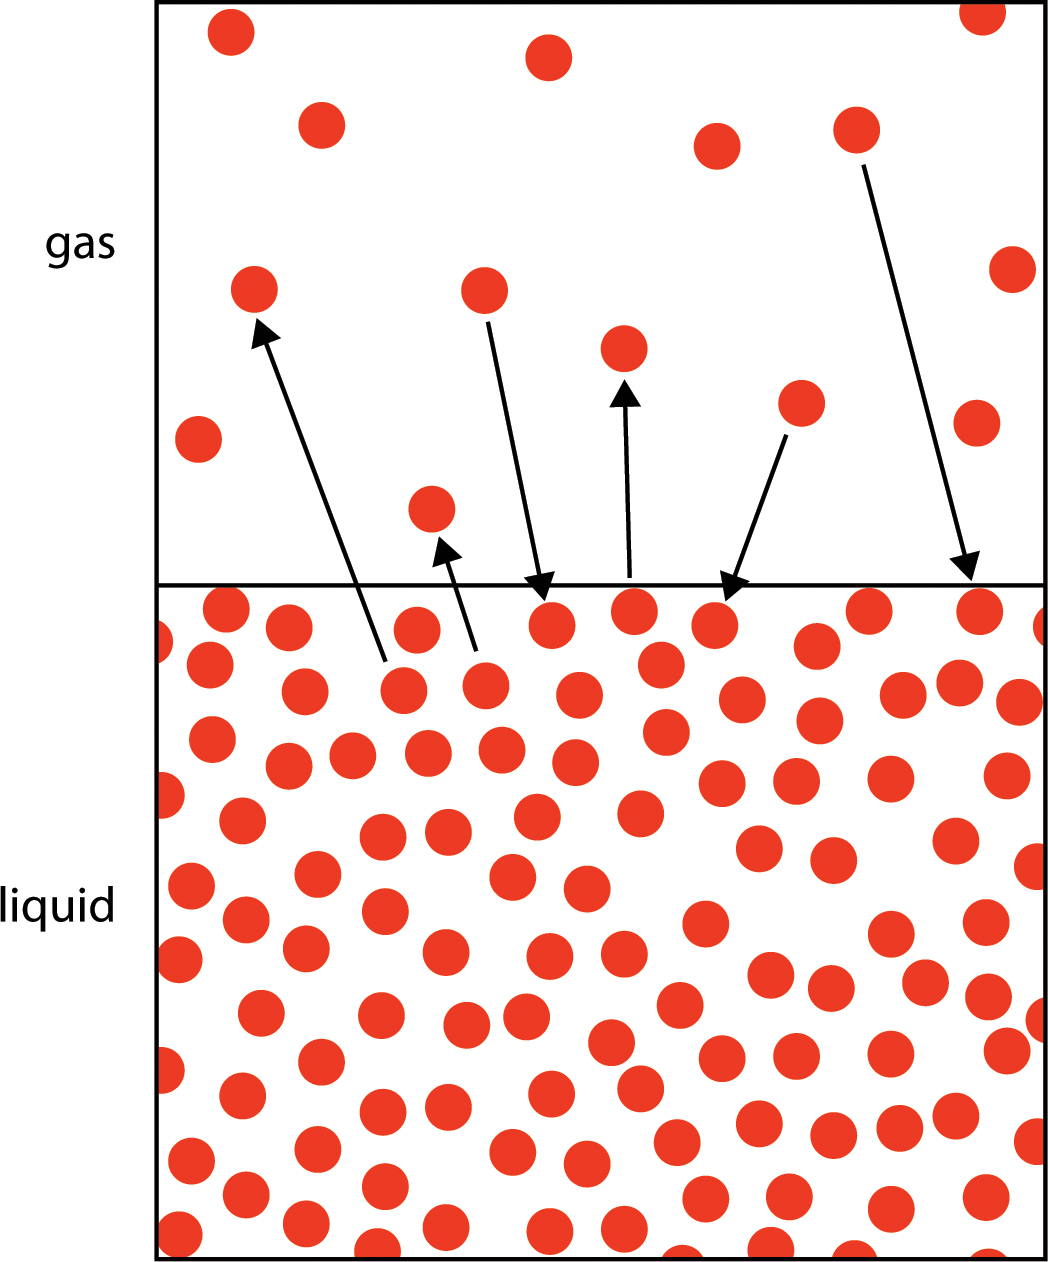 Molecules of water moving between the liquid and the gas.